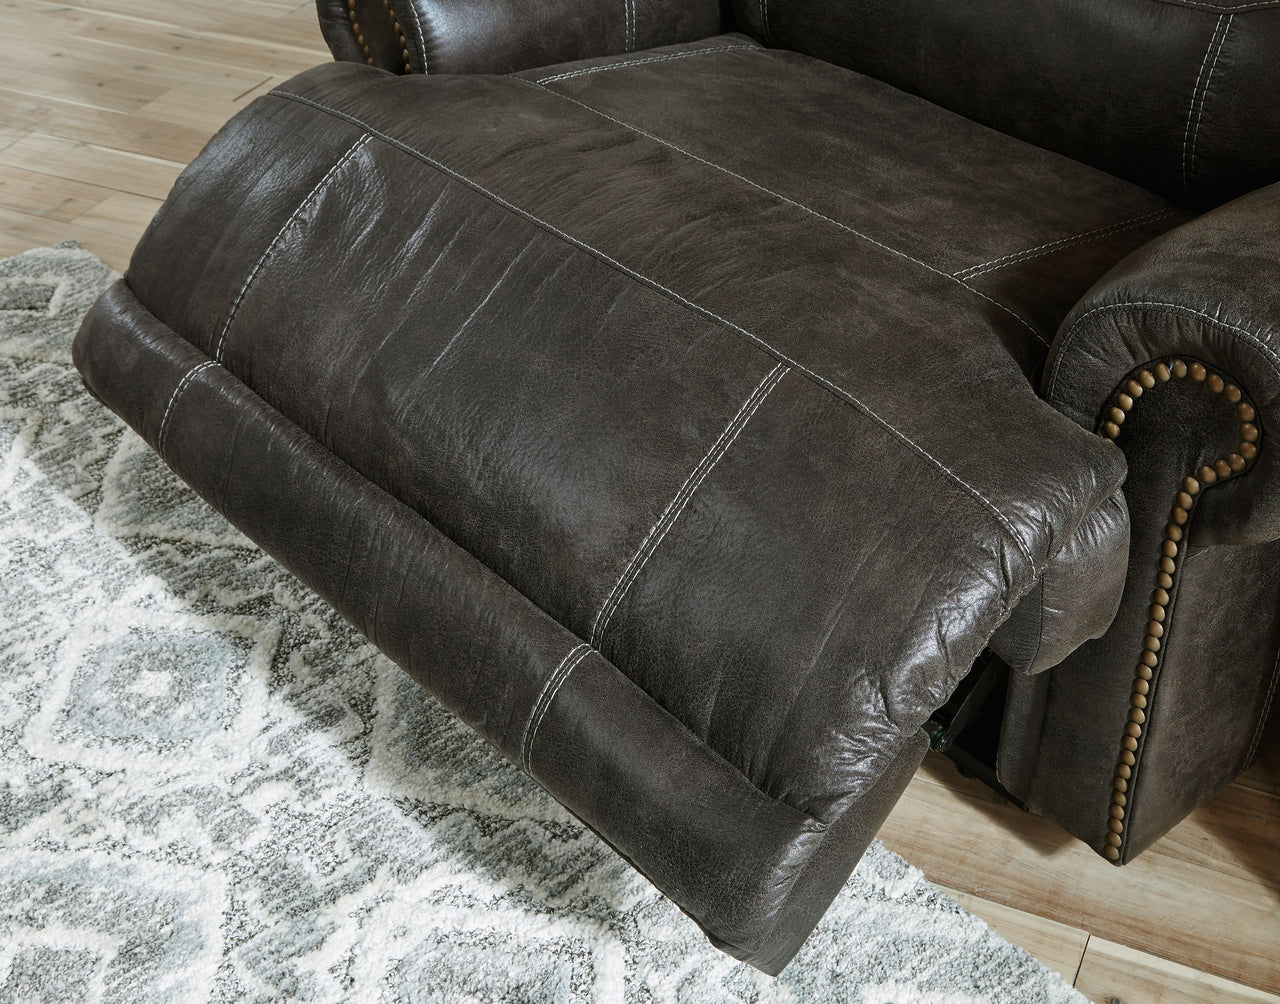 Grearview - Reclining Loveseat - Tony's Home Furnishings